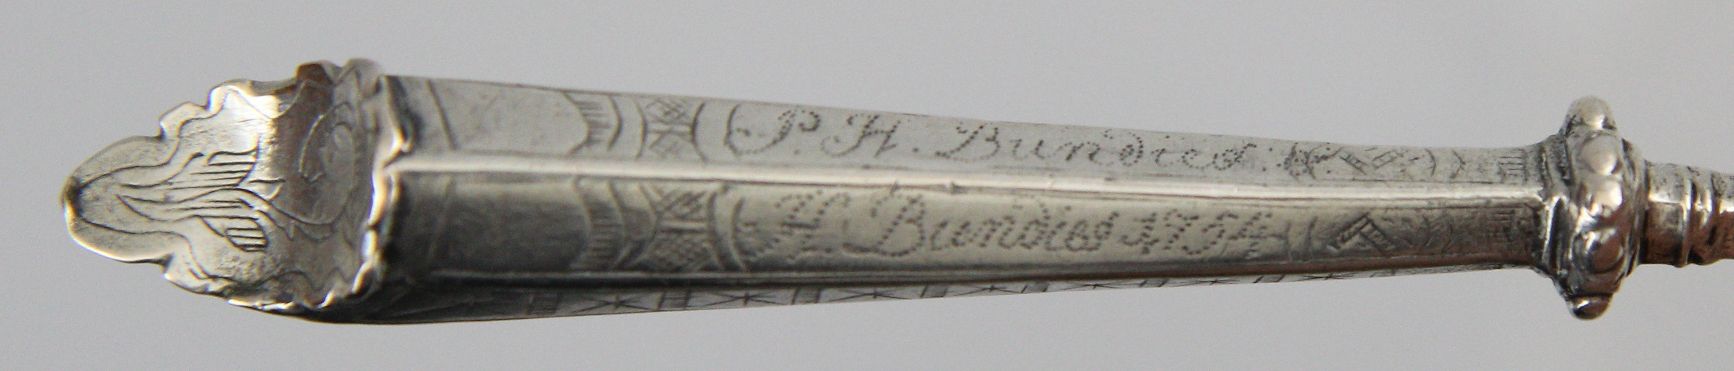 Spoon Engraved silver, l. 20 cm, weight 43 gr., probably Johann Georg Pfister Neisse/Silesia c.1745, - Image 3 of 3